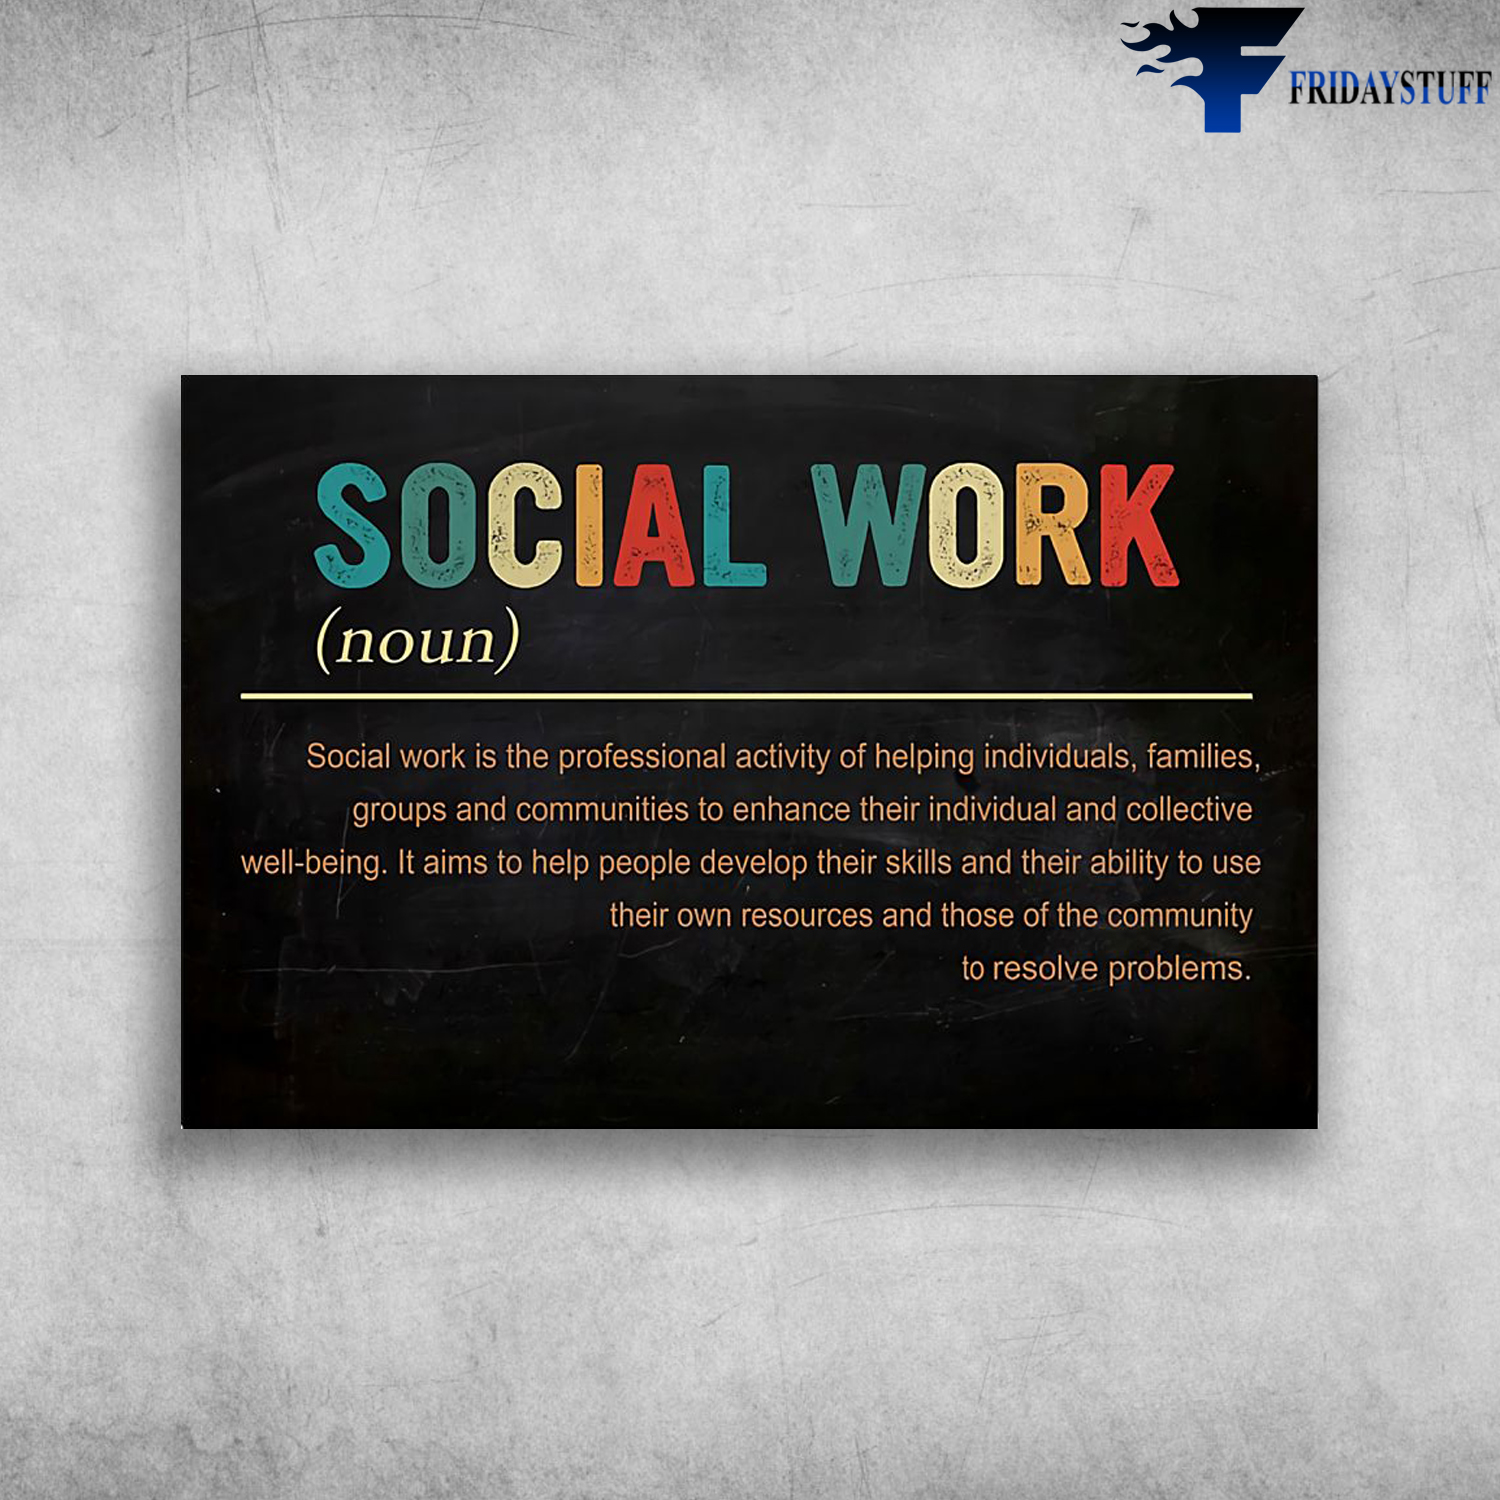 Social Work - Social Worl Is The Professional Activity Of Helping Individuals, Families, Group And Communities To Enhance Their Individual And Collective, Well-being